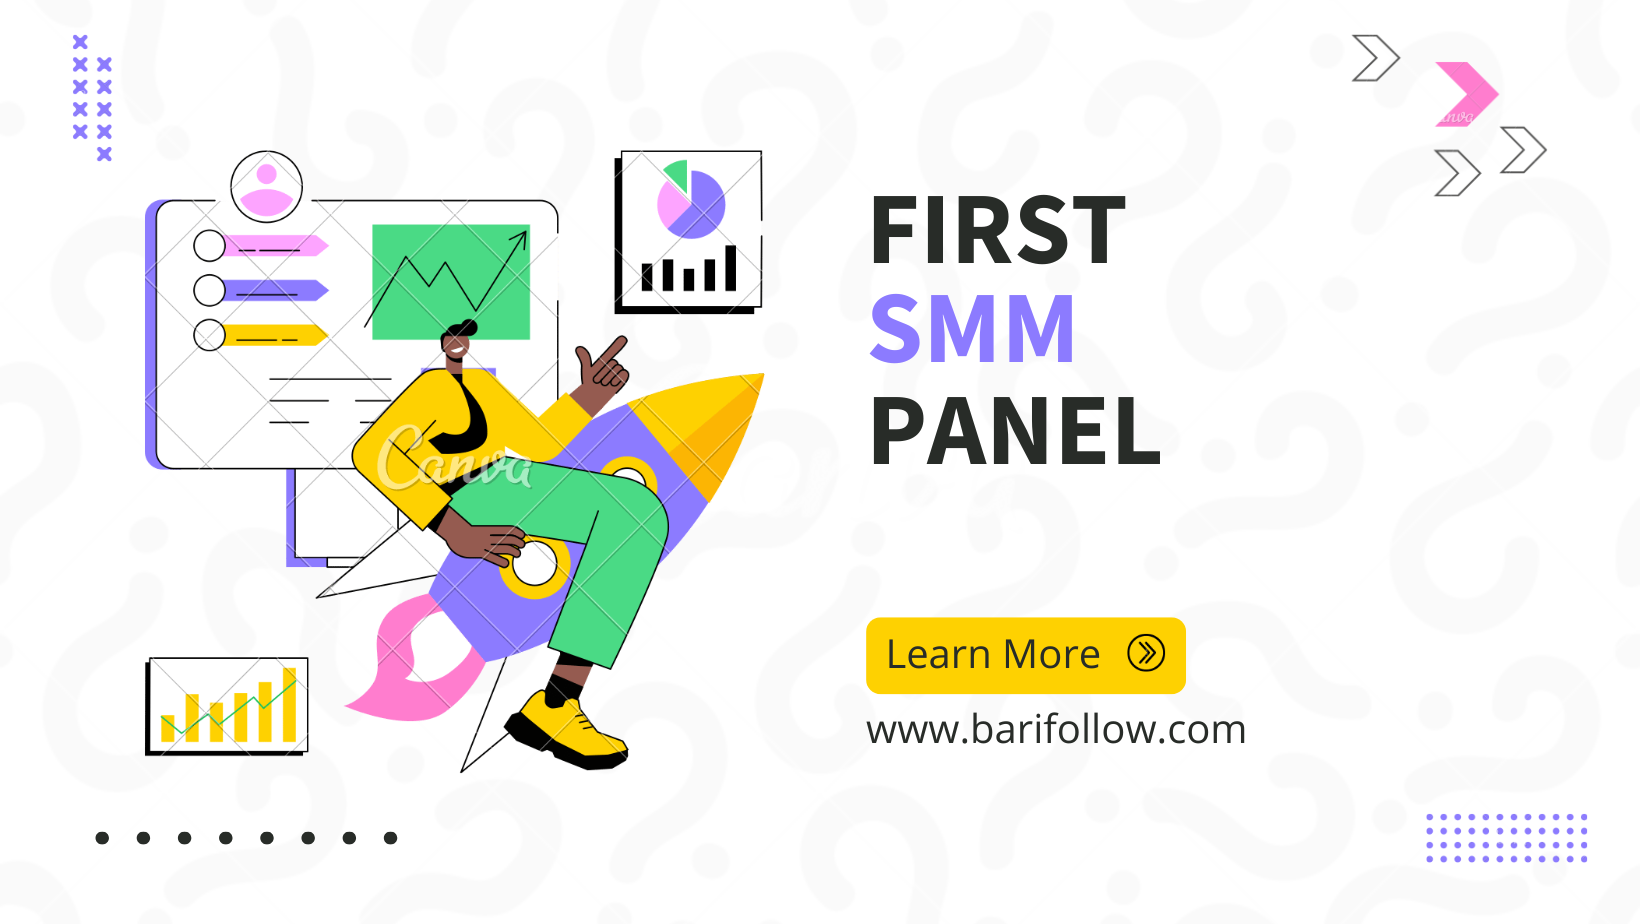 Your First SMM Panel